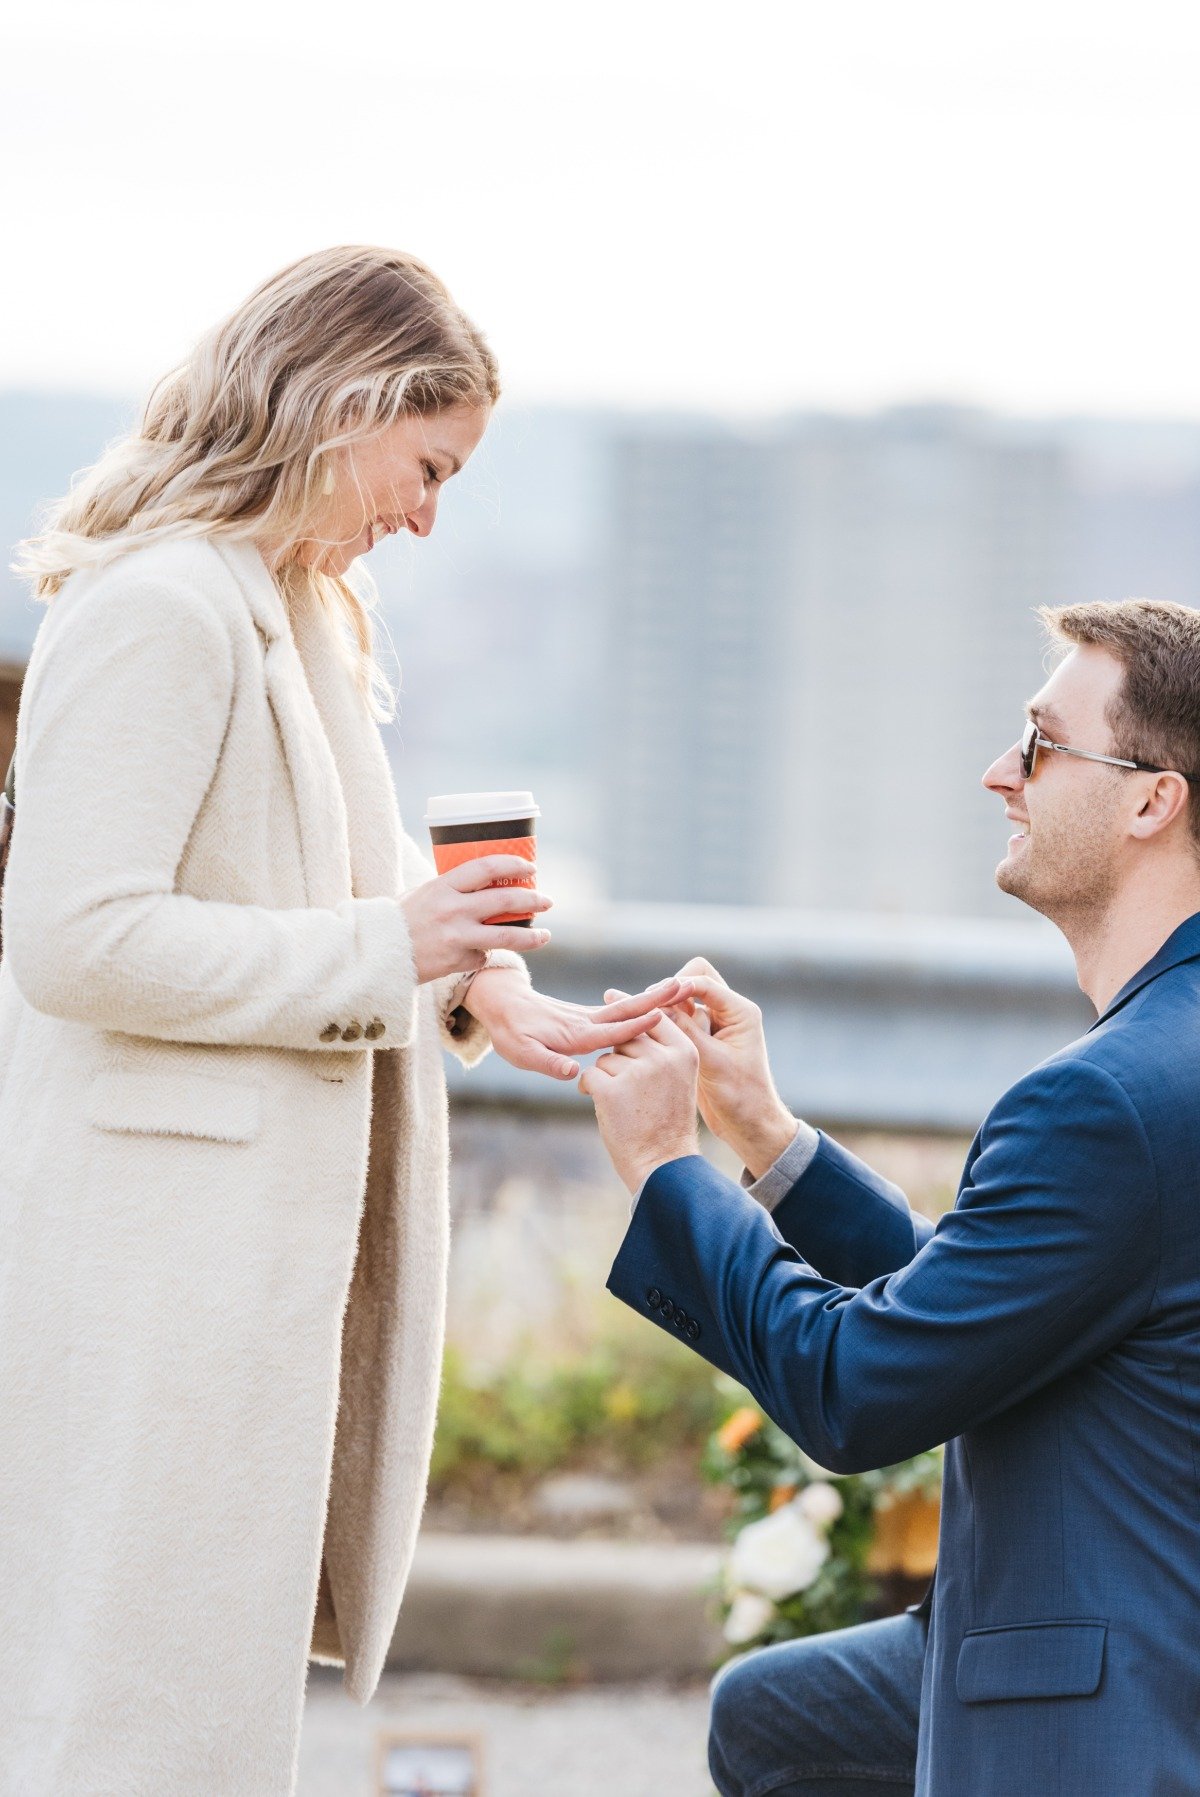 A Romantic Rooftop Proposal Inspired By A Broadway Classic